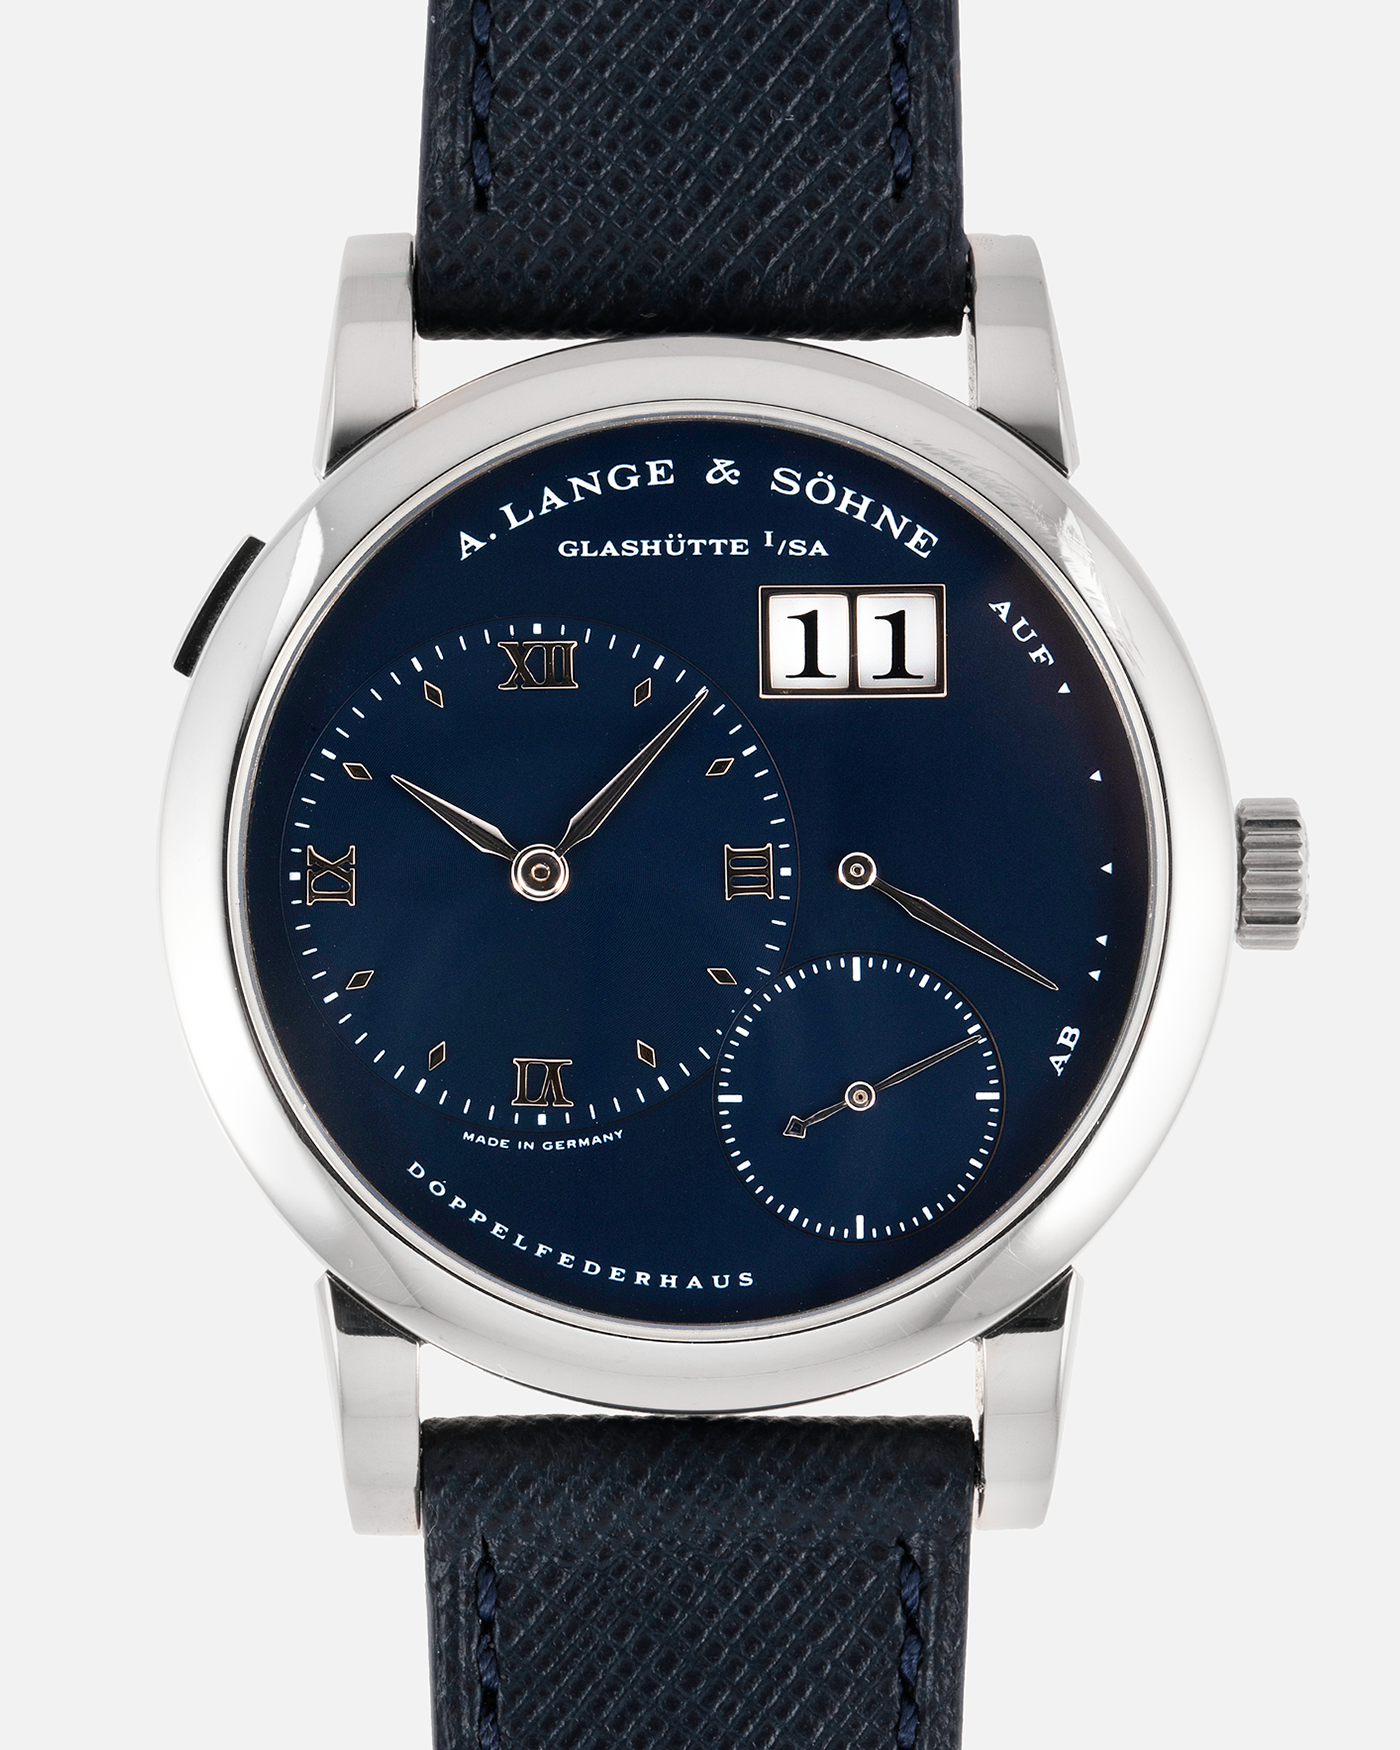 Brand: A. Lange & Sohne Year: 2000’s Model: Lange 1  Reference Number: 101.027 Material: 18k White Gold Movement: Manual Winding L901.5 Case Diameter: 38.5mm Bracelet/Strap: Molequin Navy Blue Textured Calf with 18k White Gold A. Lange & Sohne Tang Buckle